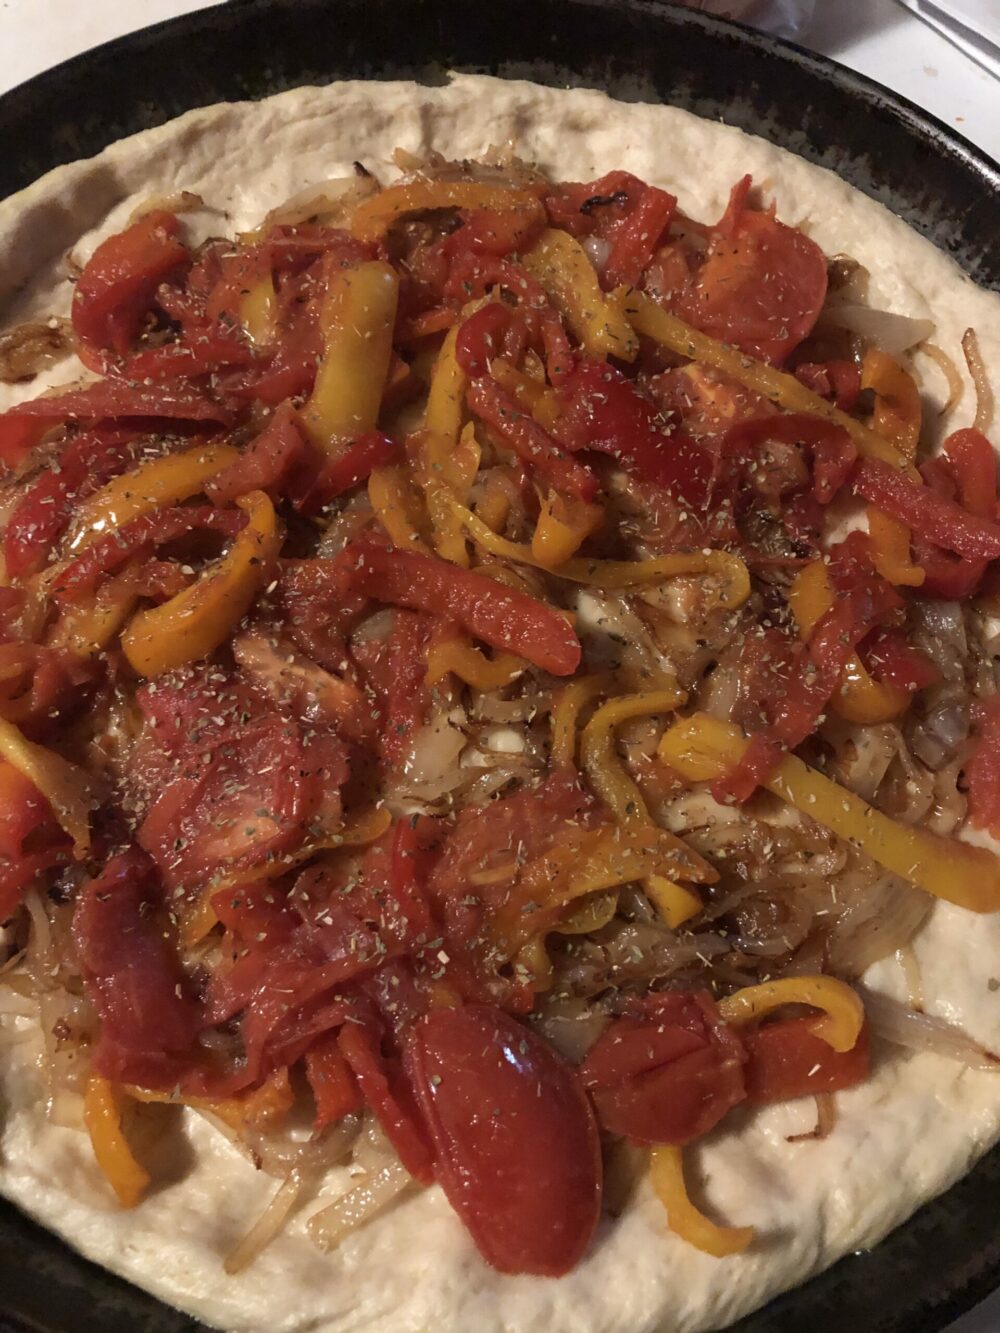 peppers and onions on the pizza dough